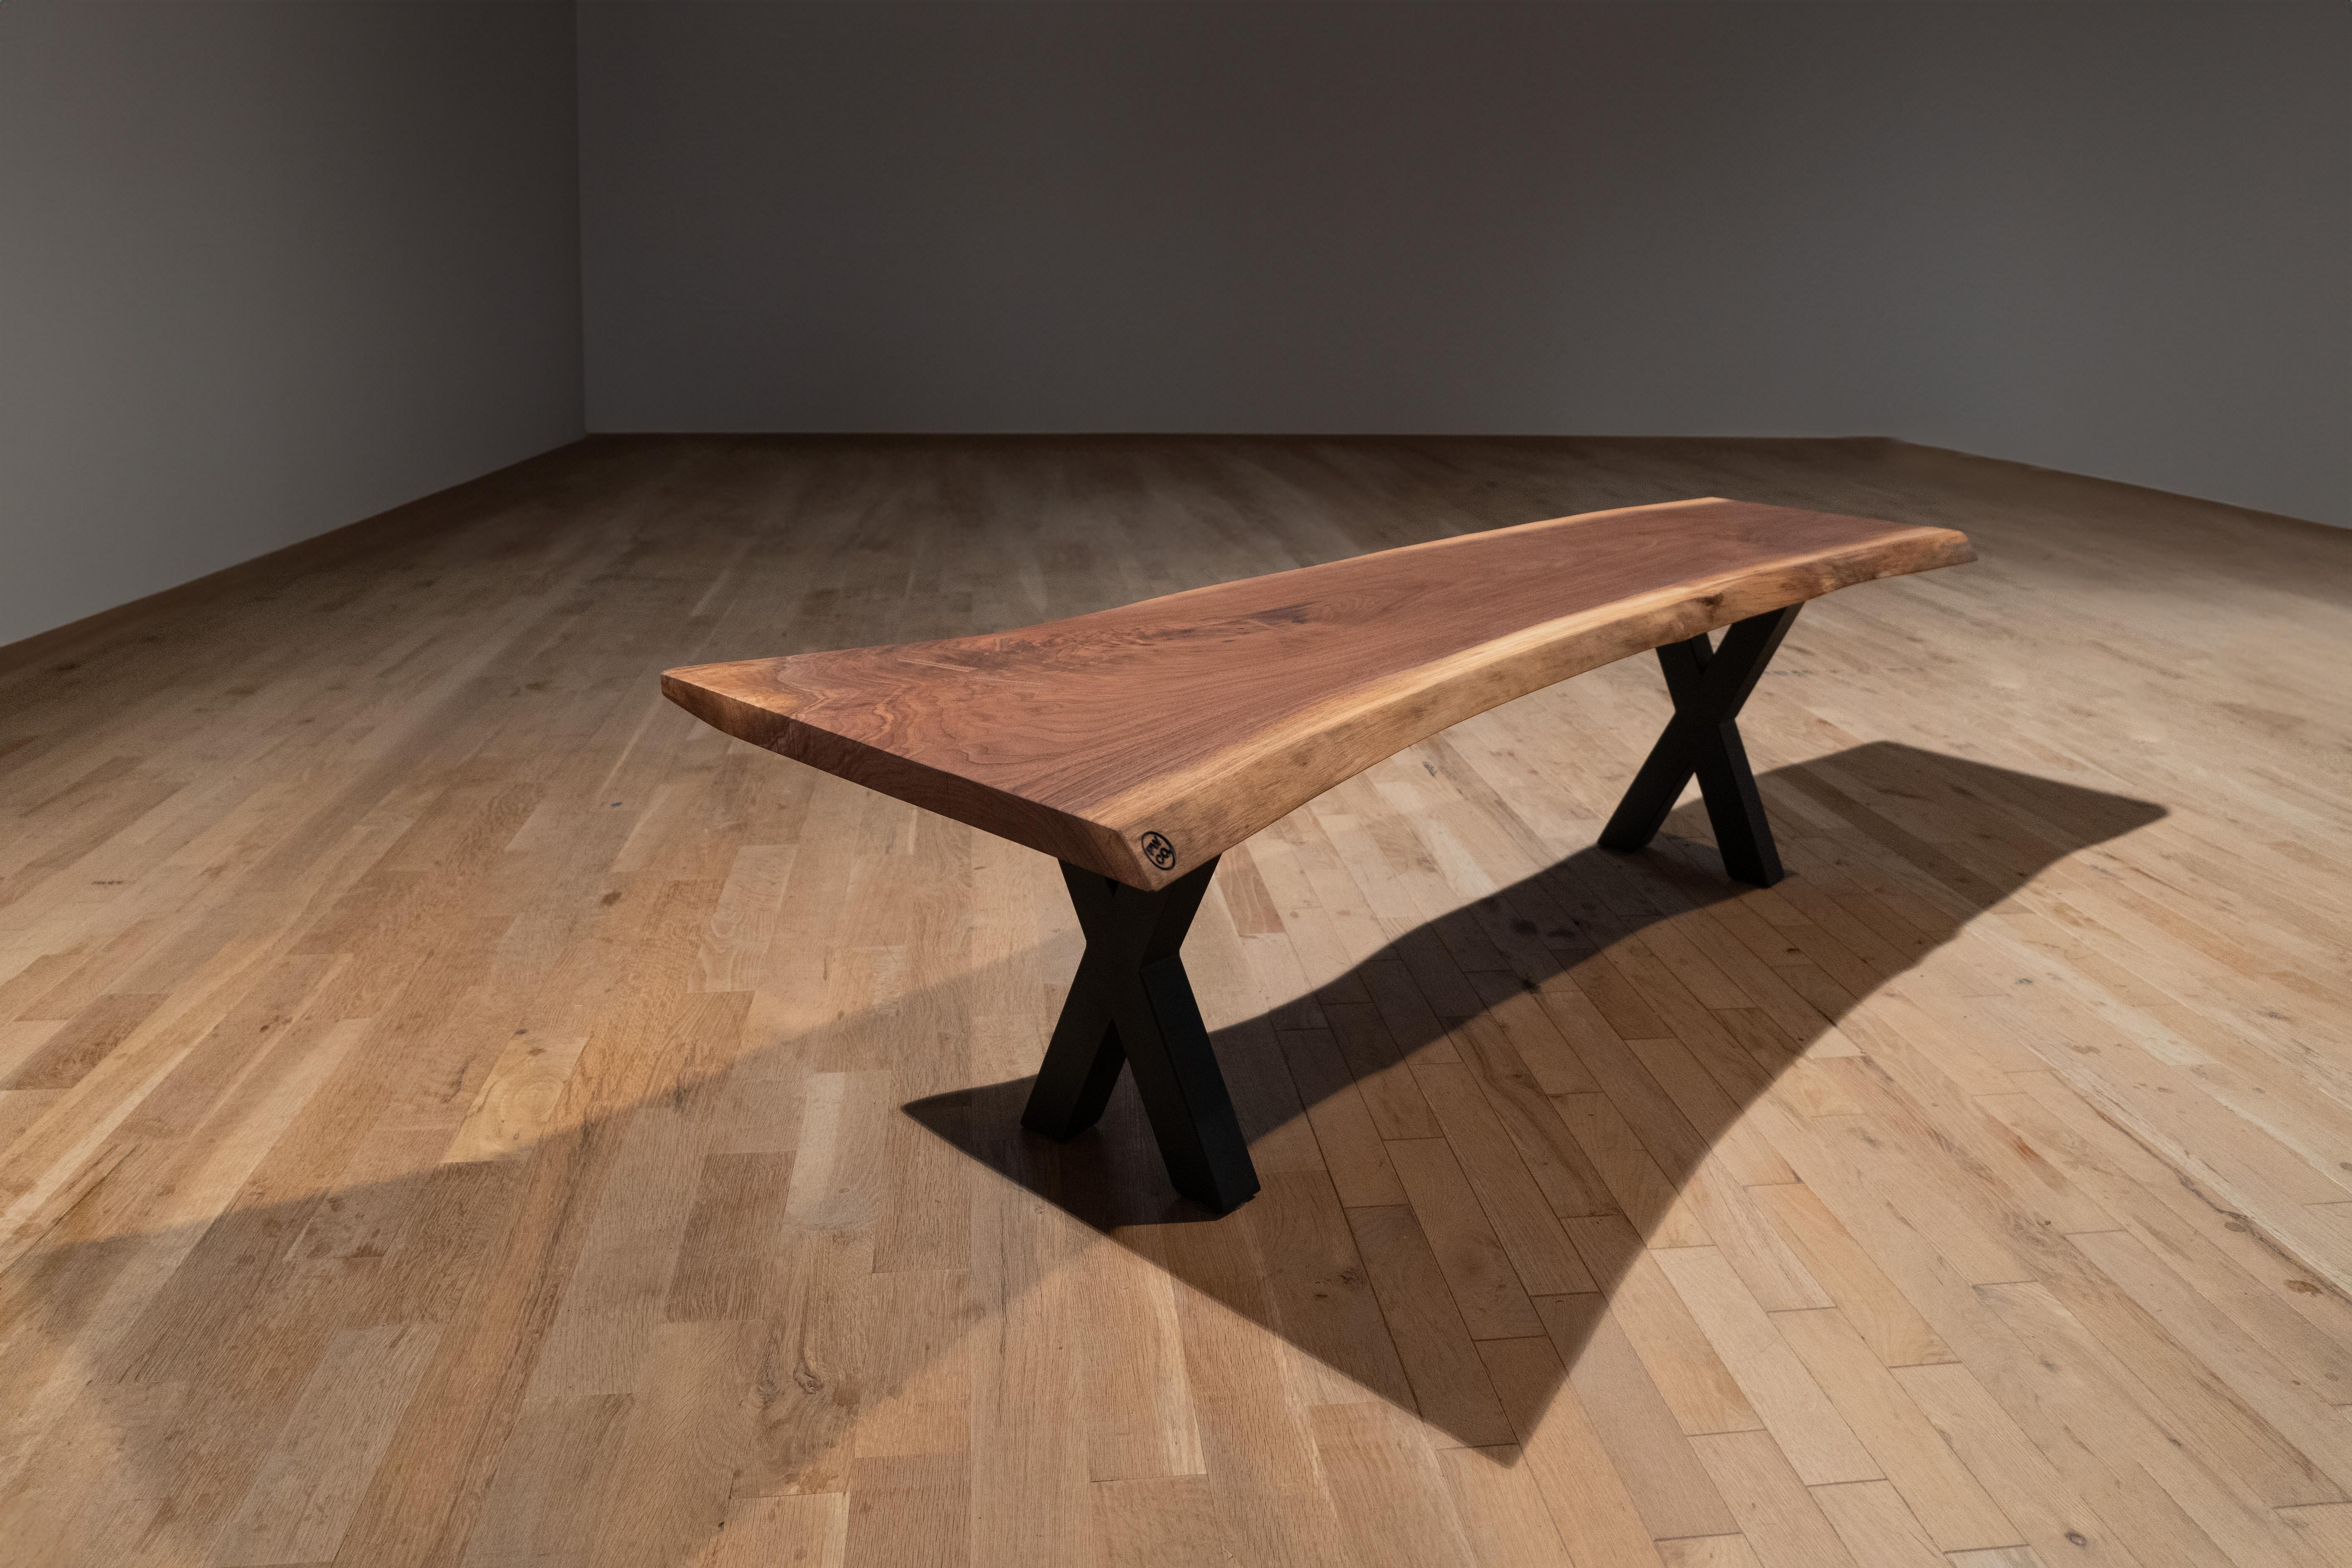 This bench is a single slab of walnut supported by a modern X-base. Whether placed in a sleek loft or a minimalist office, its fusion of natural elements and contemporary aesthetics adds an inviting touch of sophistication to any space.

A Paramount